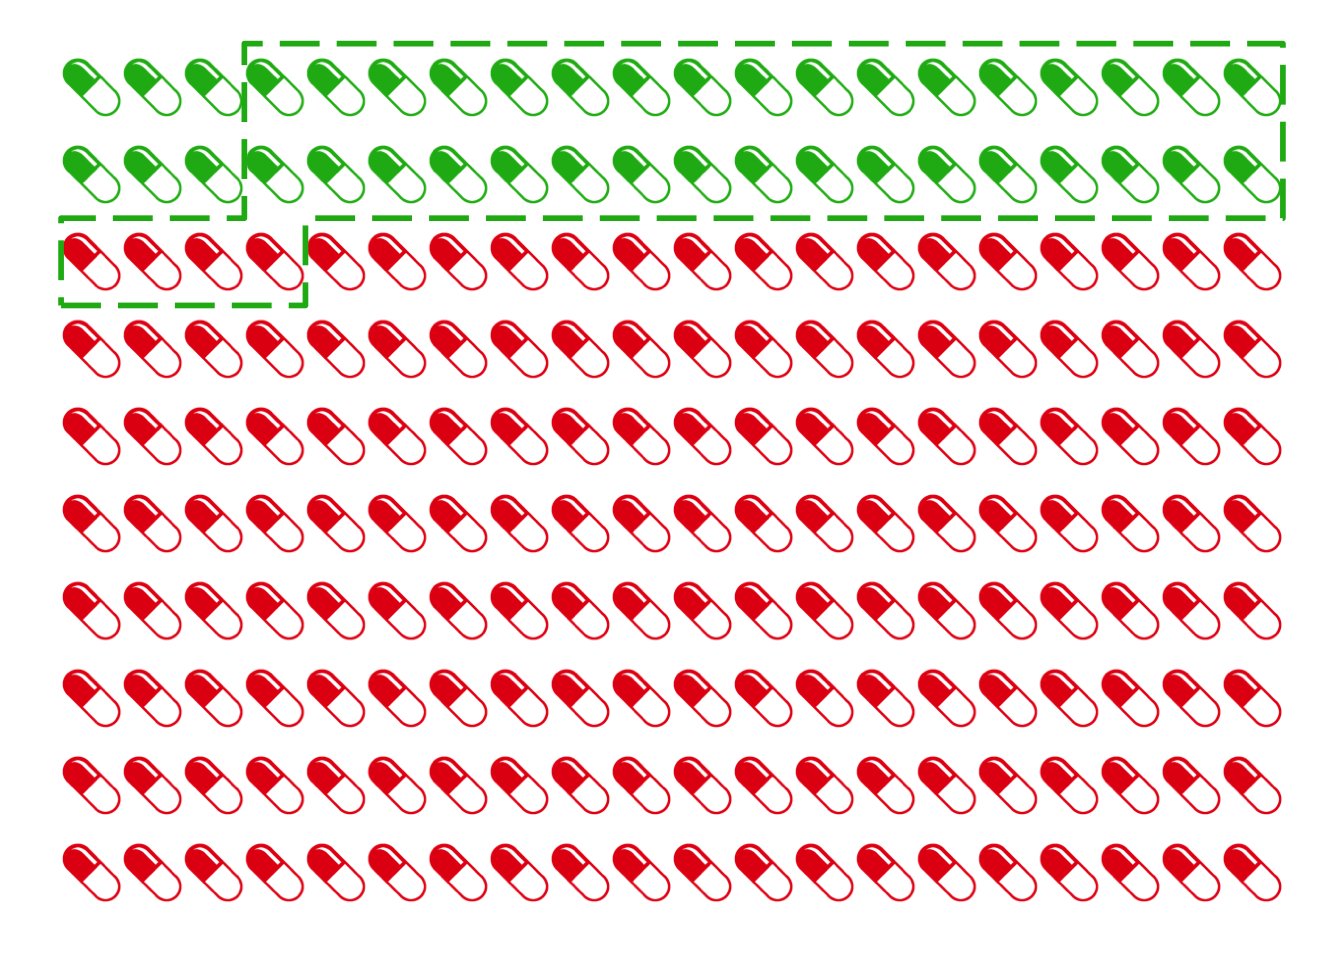 The results of our $200$ studies. Green pills represent genuinely effective treatments, red pills represent useless treatments. The dashed green line represents the treatments we approve: only $34$ out of $38$ of these are genuinely effective.